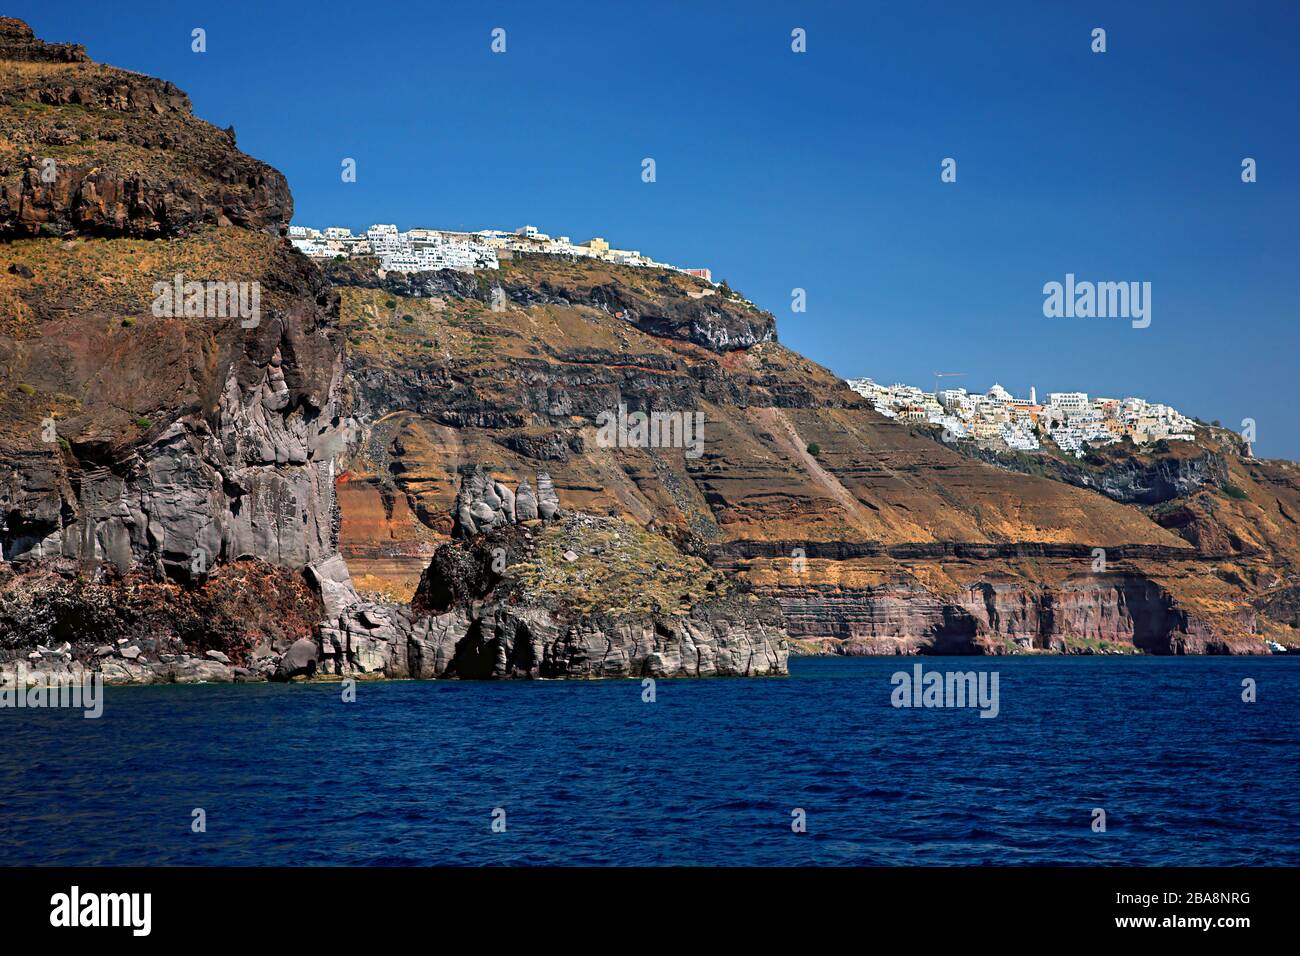 Firostefani (front) and Fira (back) villages hanging over the caldera of Santorini island, Cyclades, Aegean sea, Greece. Stock Photo